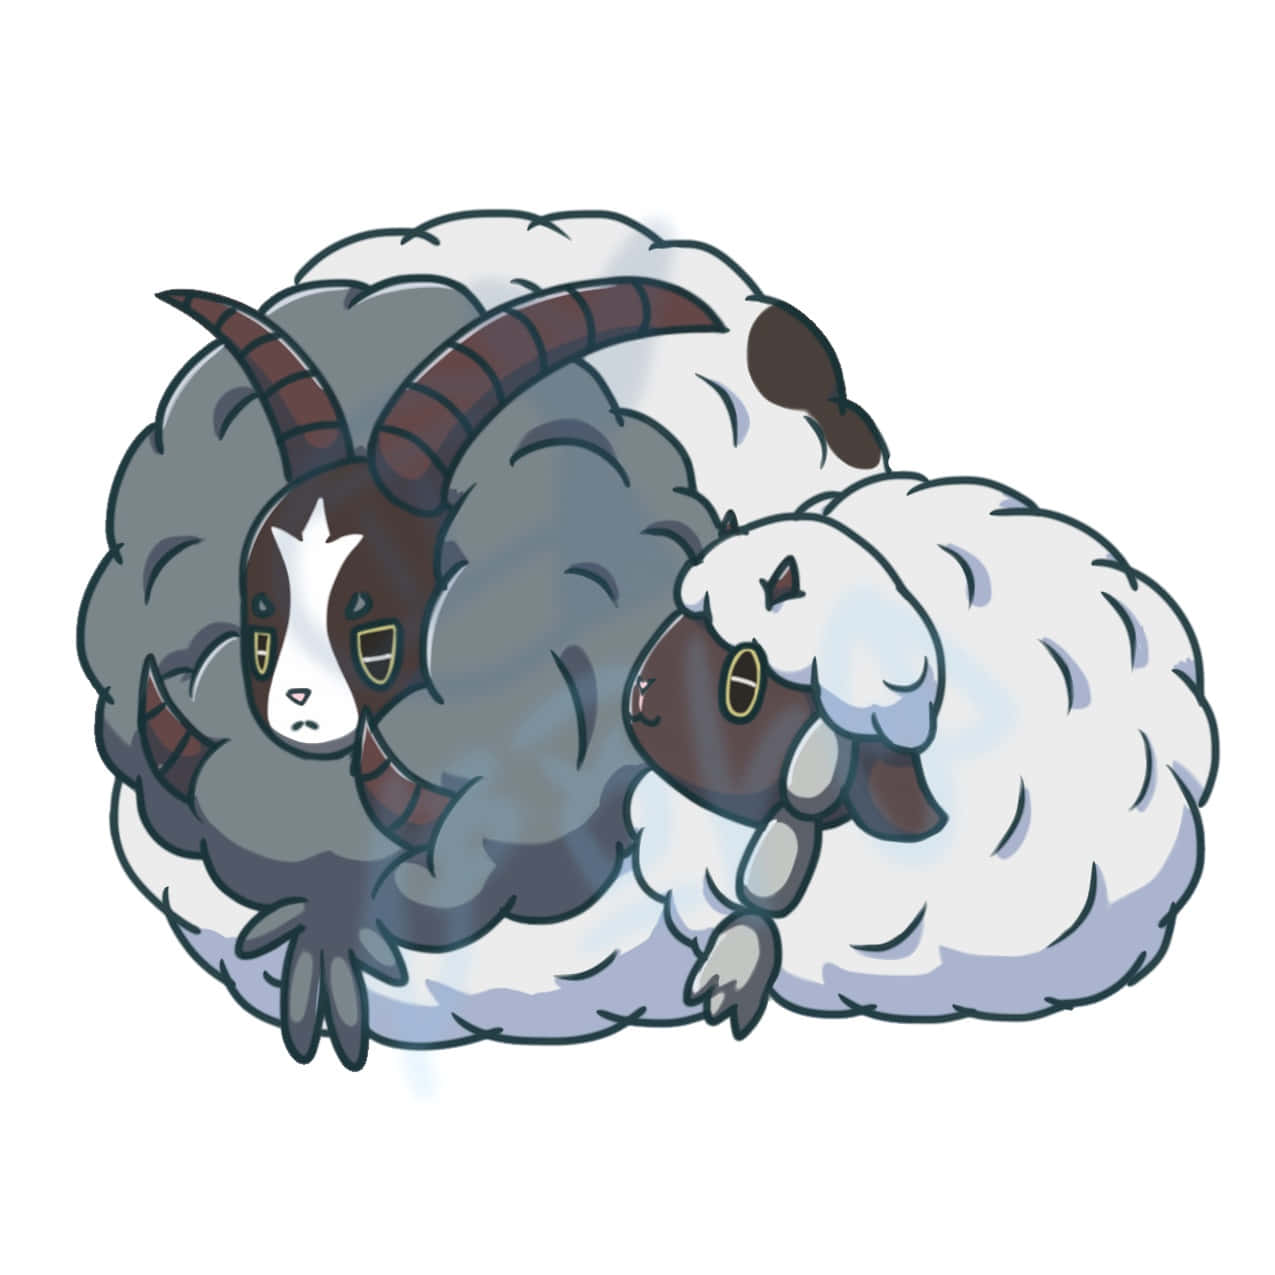 Dubwool And Wooloo Wallpaper